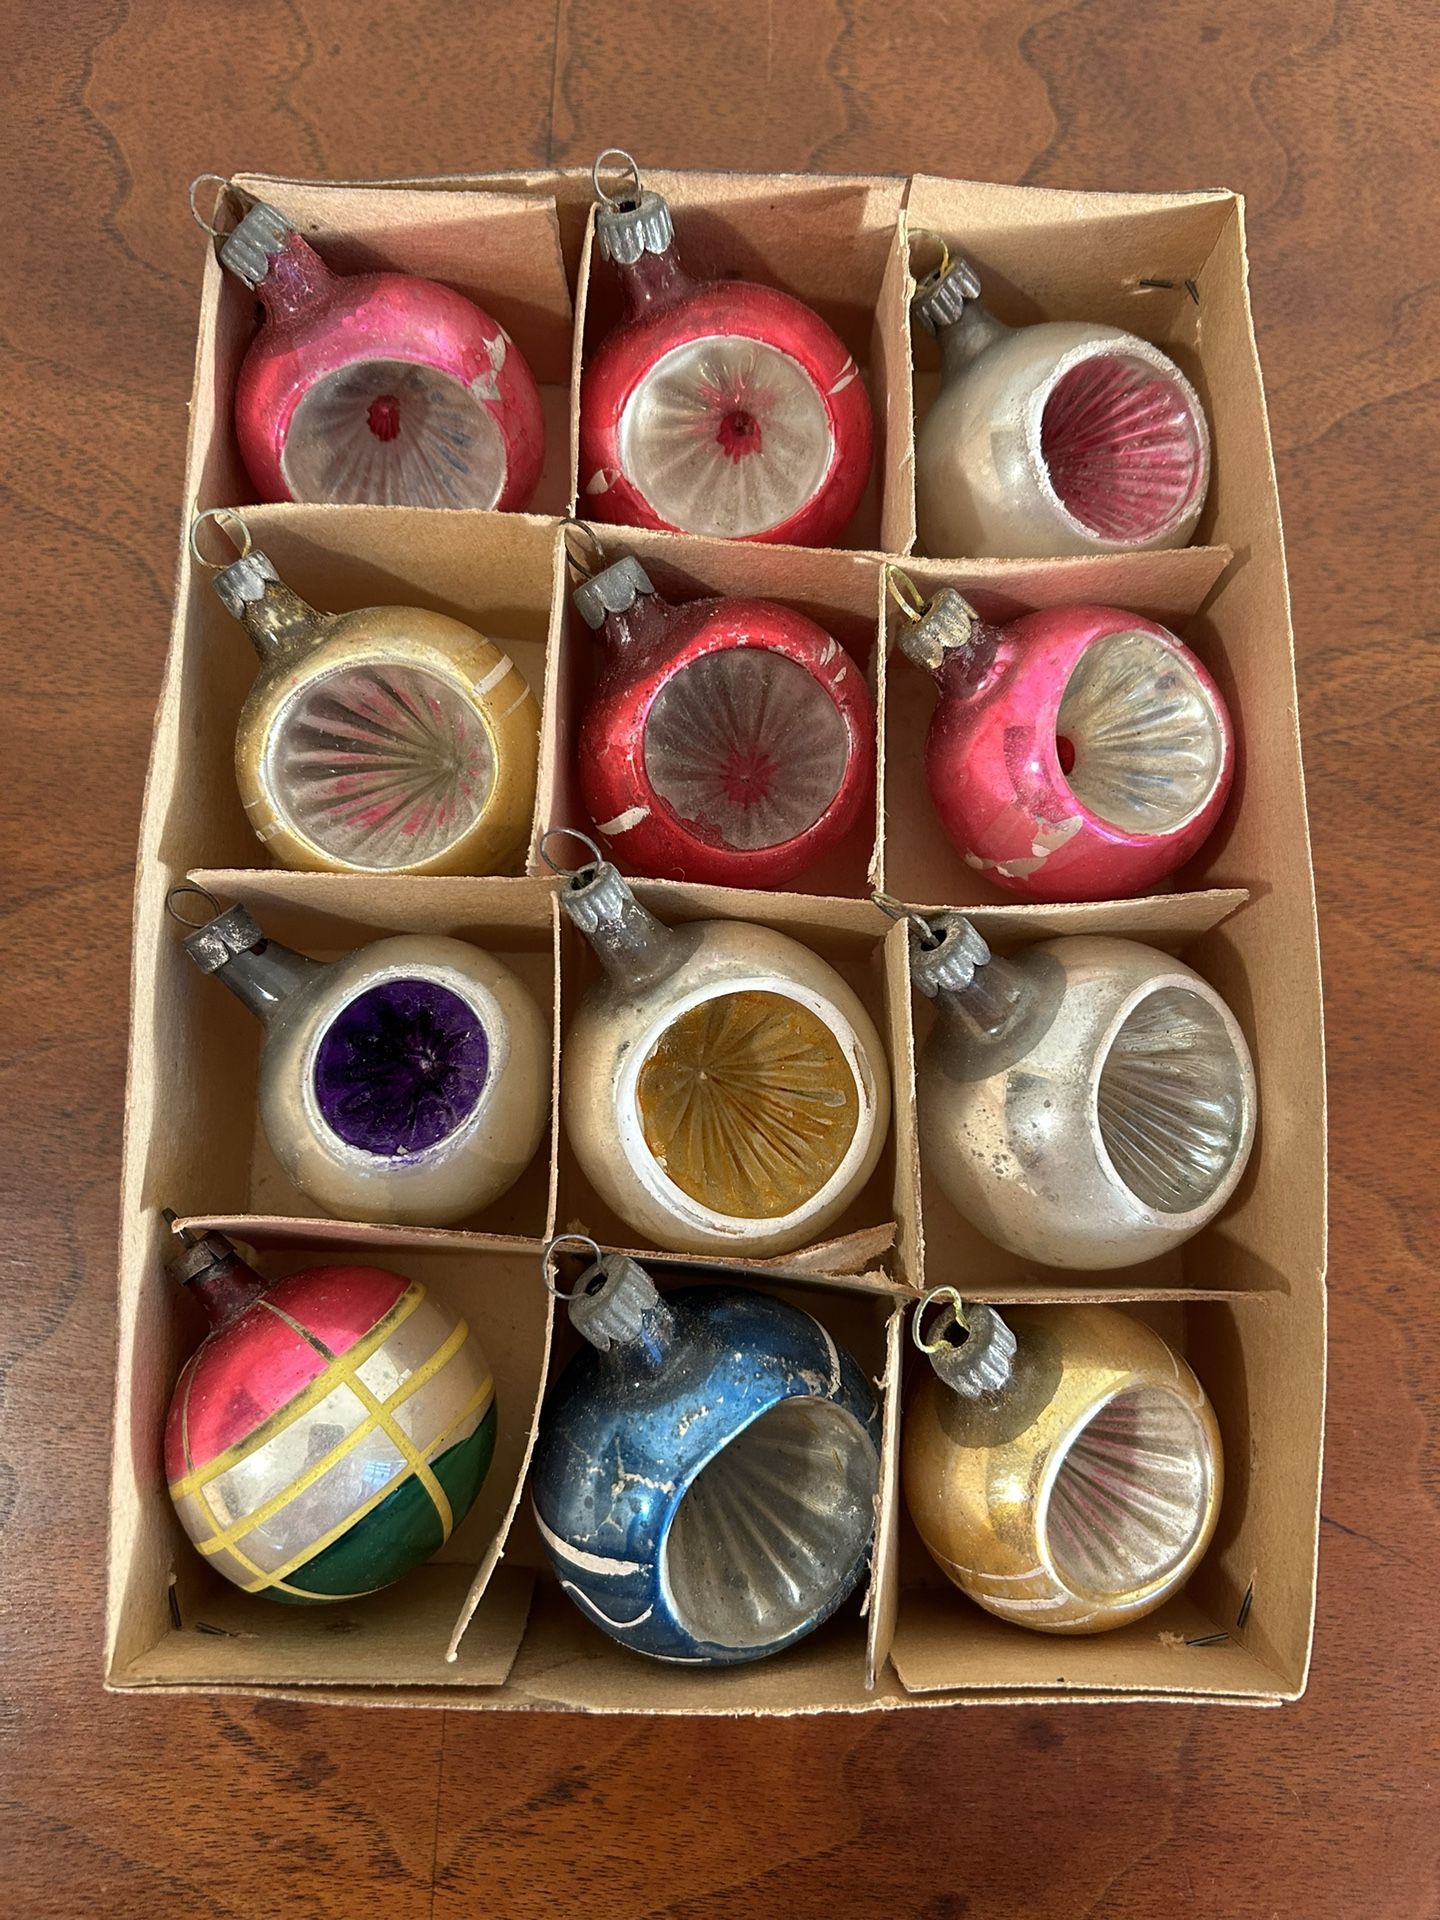 Vintage box of 12 Christmas Ornaments- indent, mica, Poland